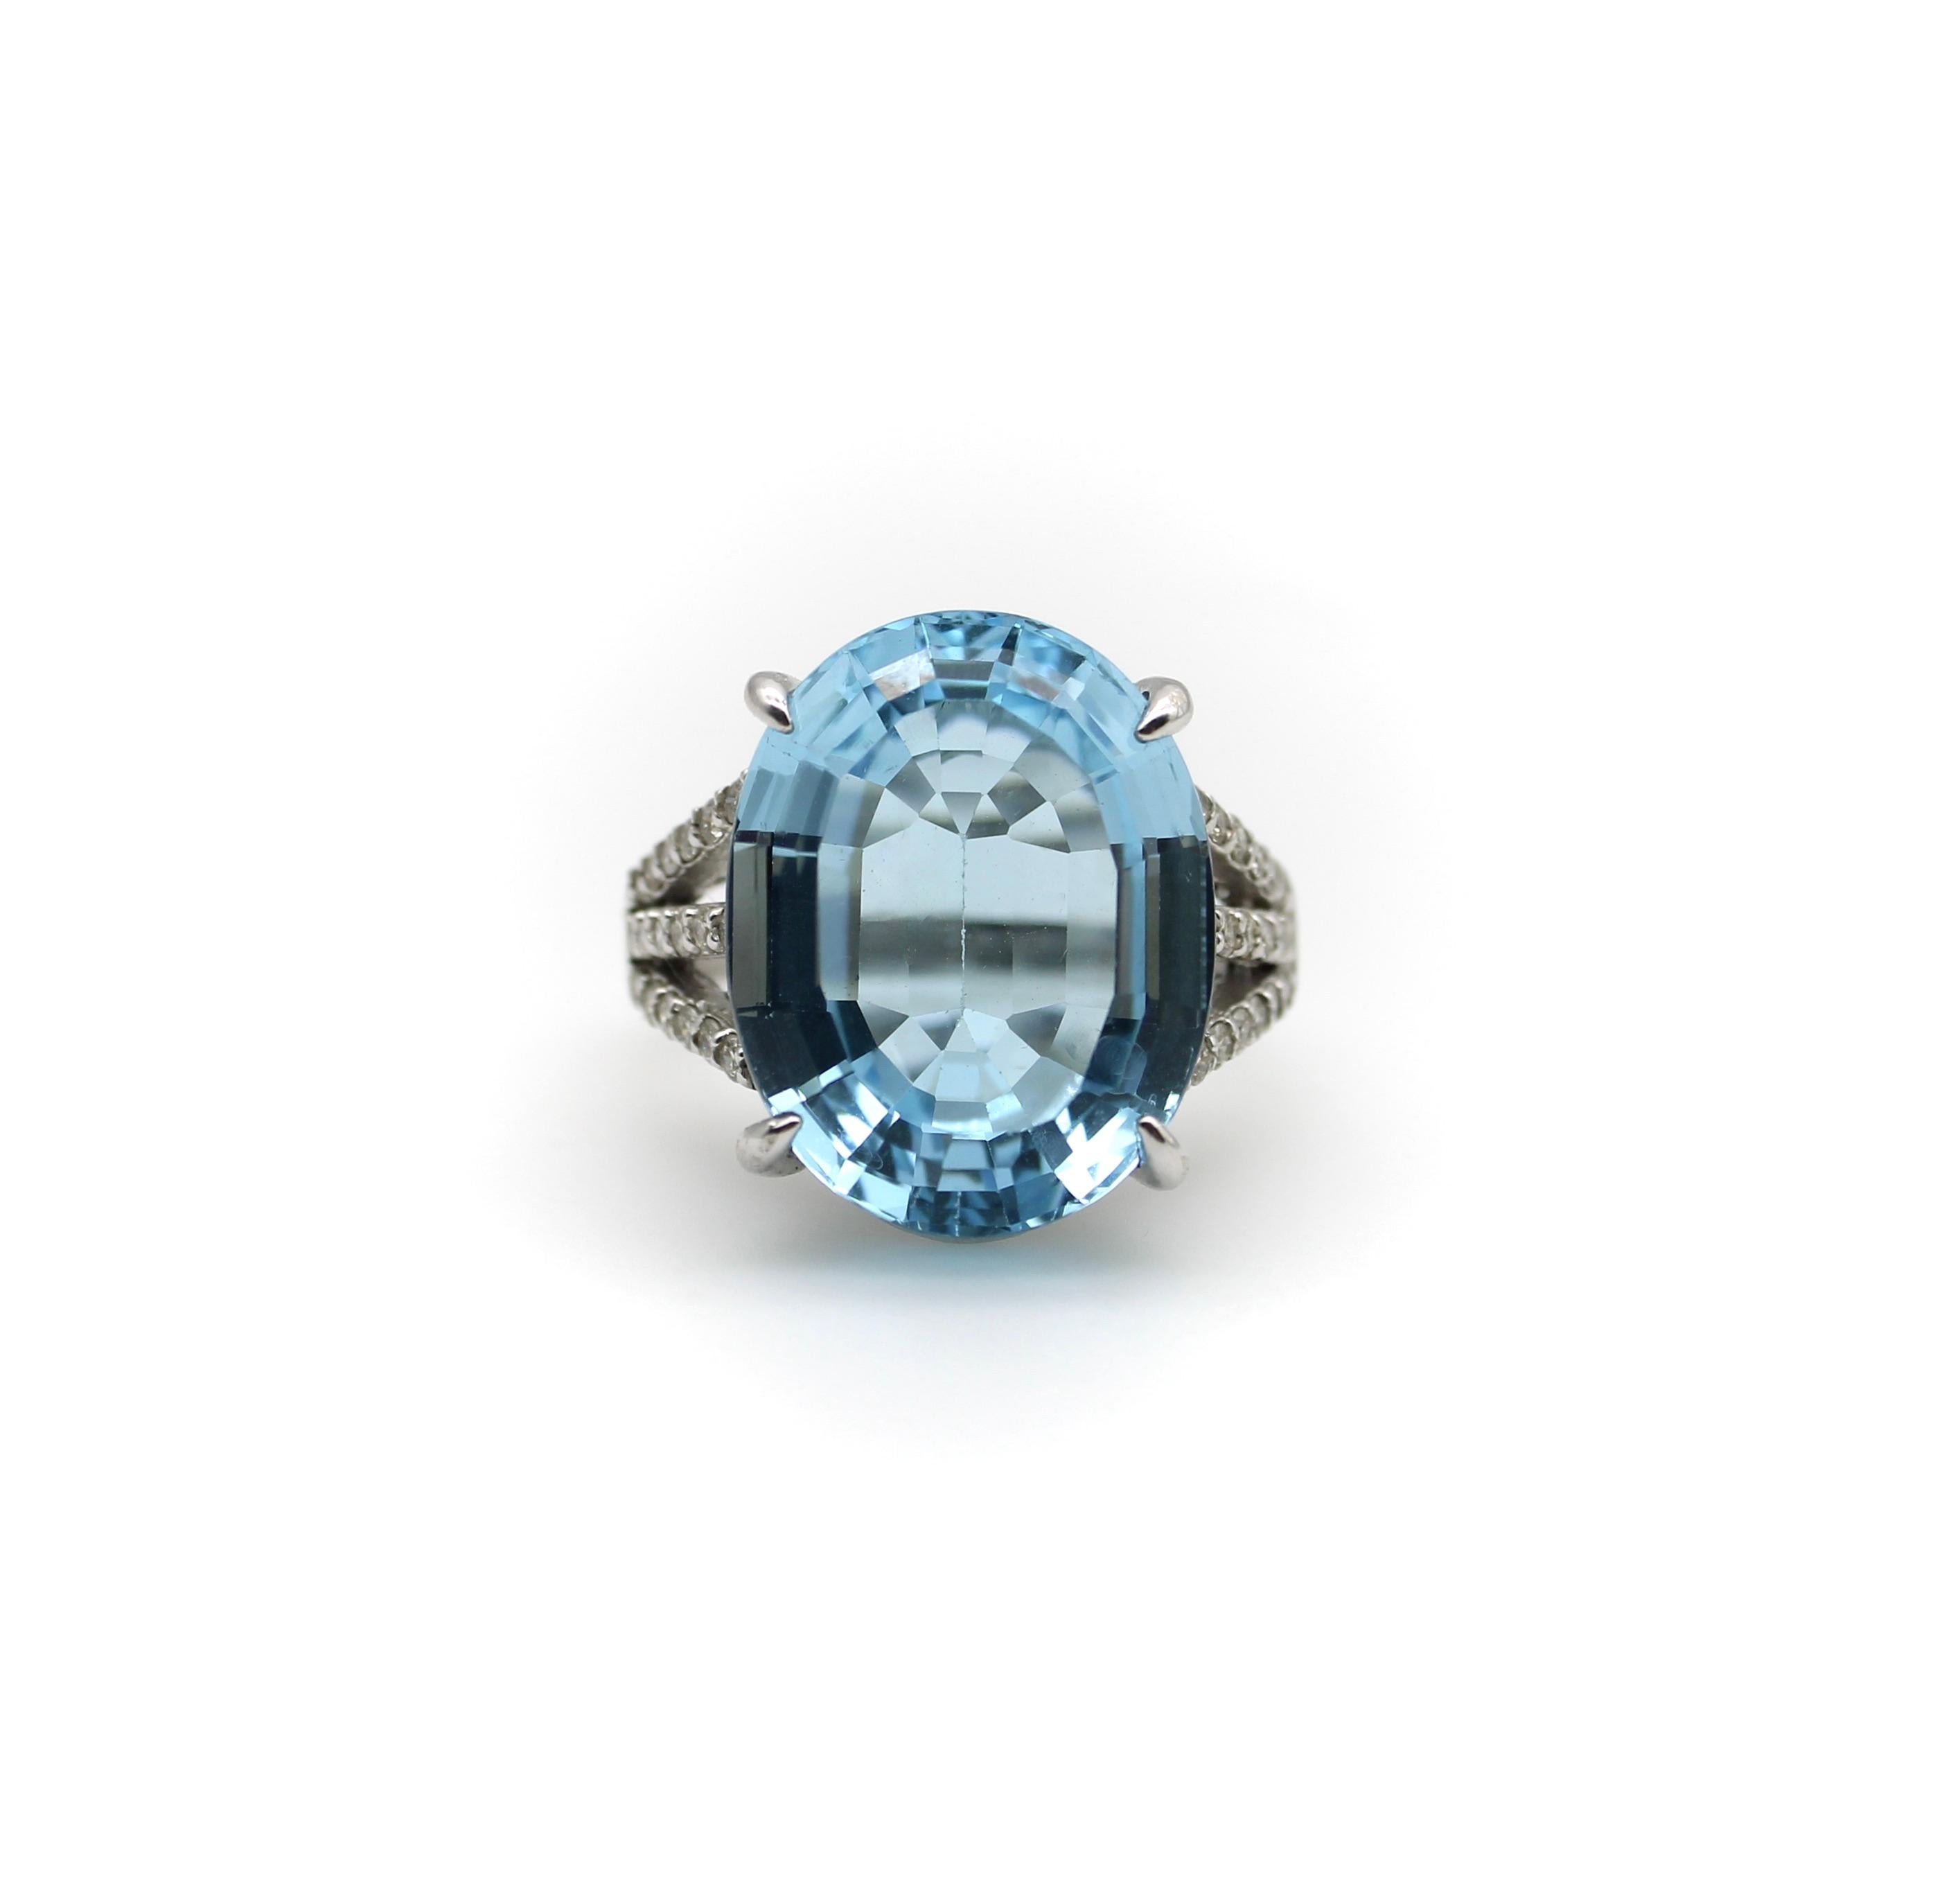 This 14k white gold, diamond, and blue topaz ring contains a striking 19+ carat vibrant blue gemstone. The oval stone is beautifully cut with facets that reflect a myriad of Mediterranean blue magic. An elaborate, scrolling foliate pattern details